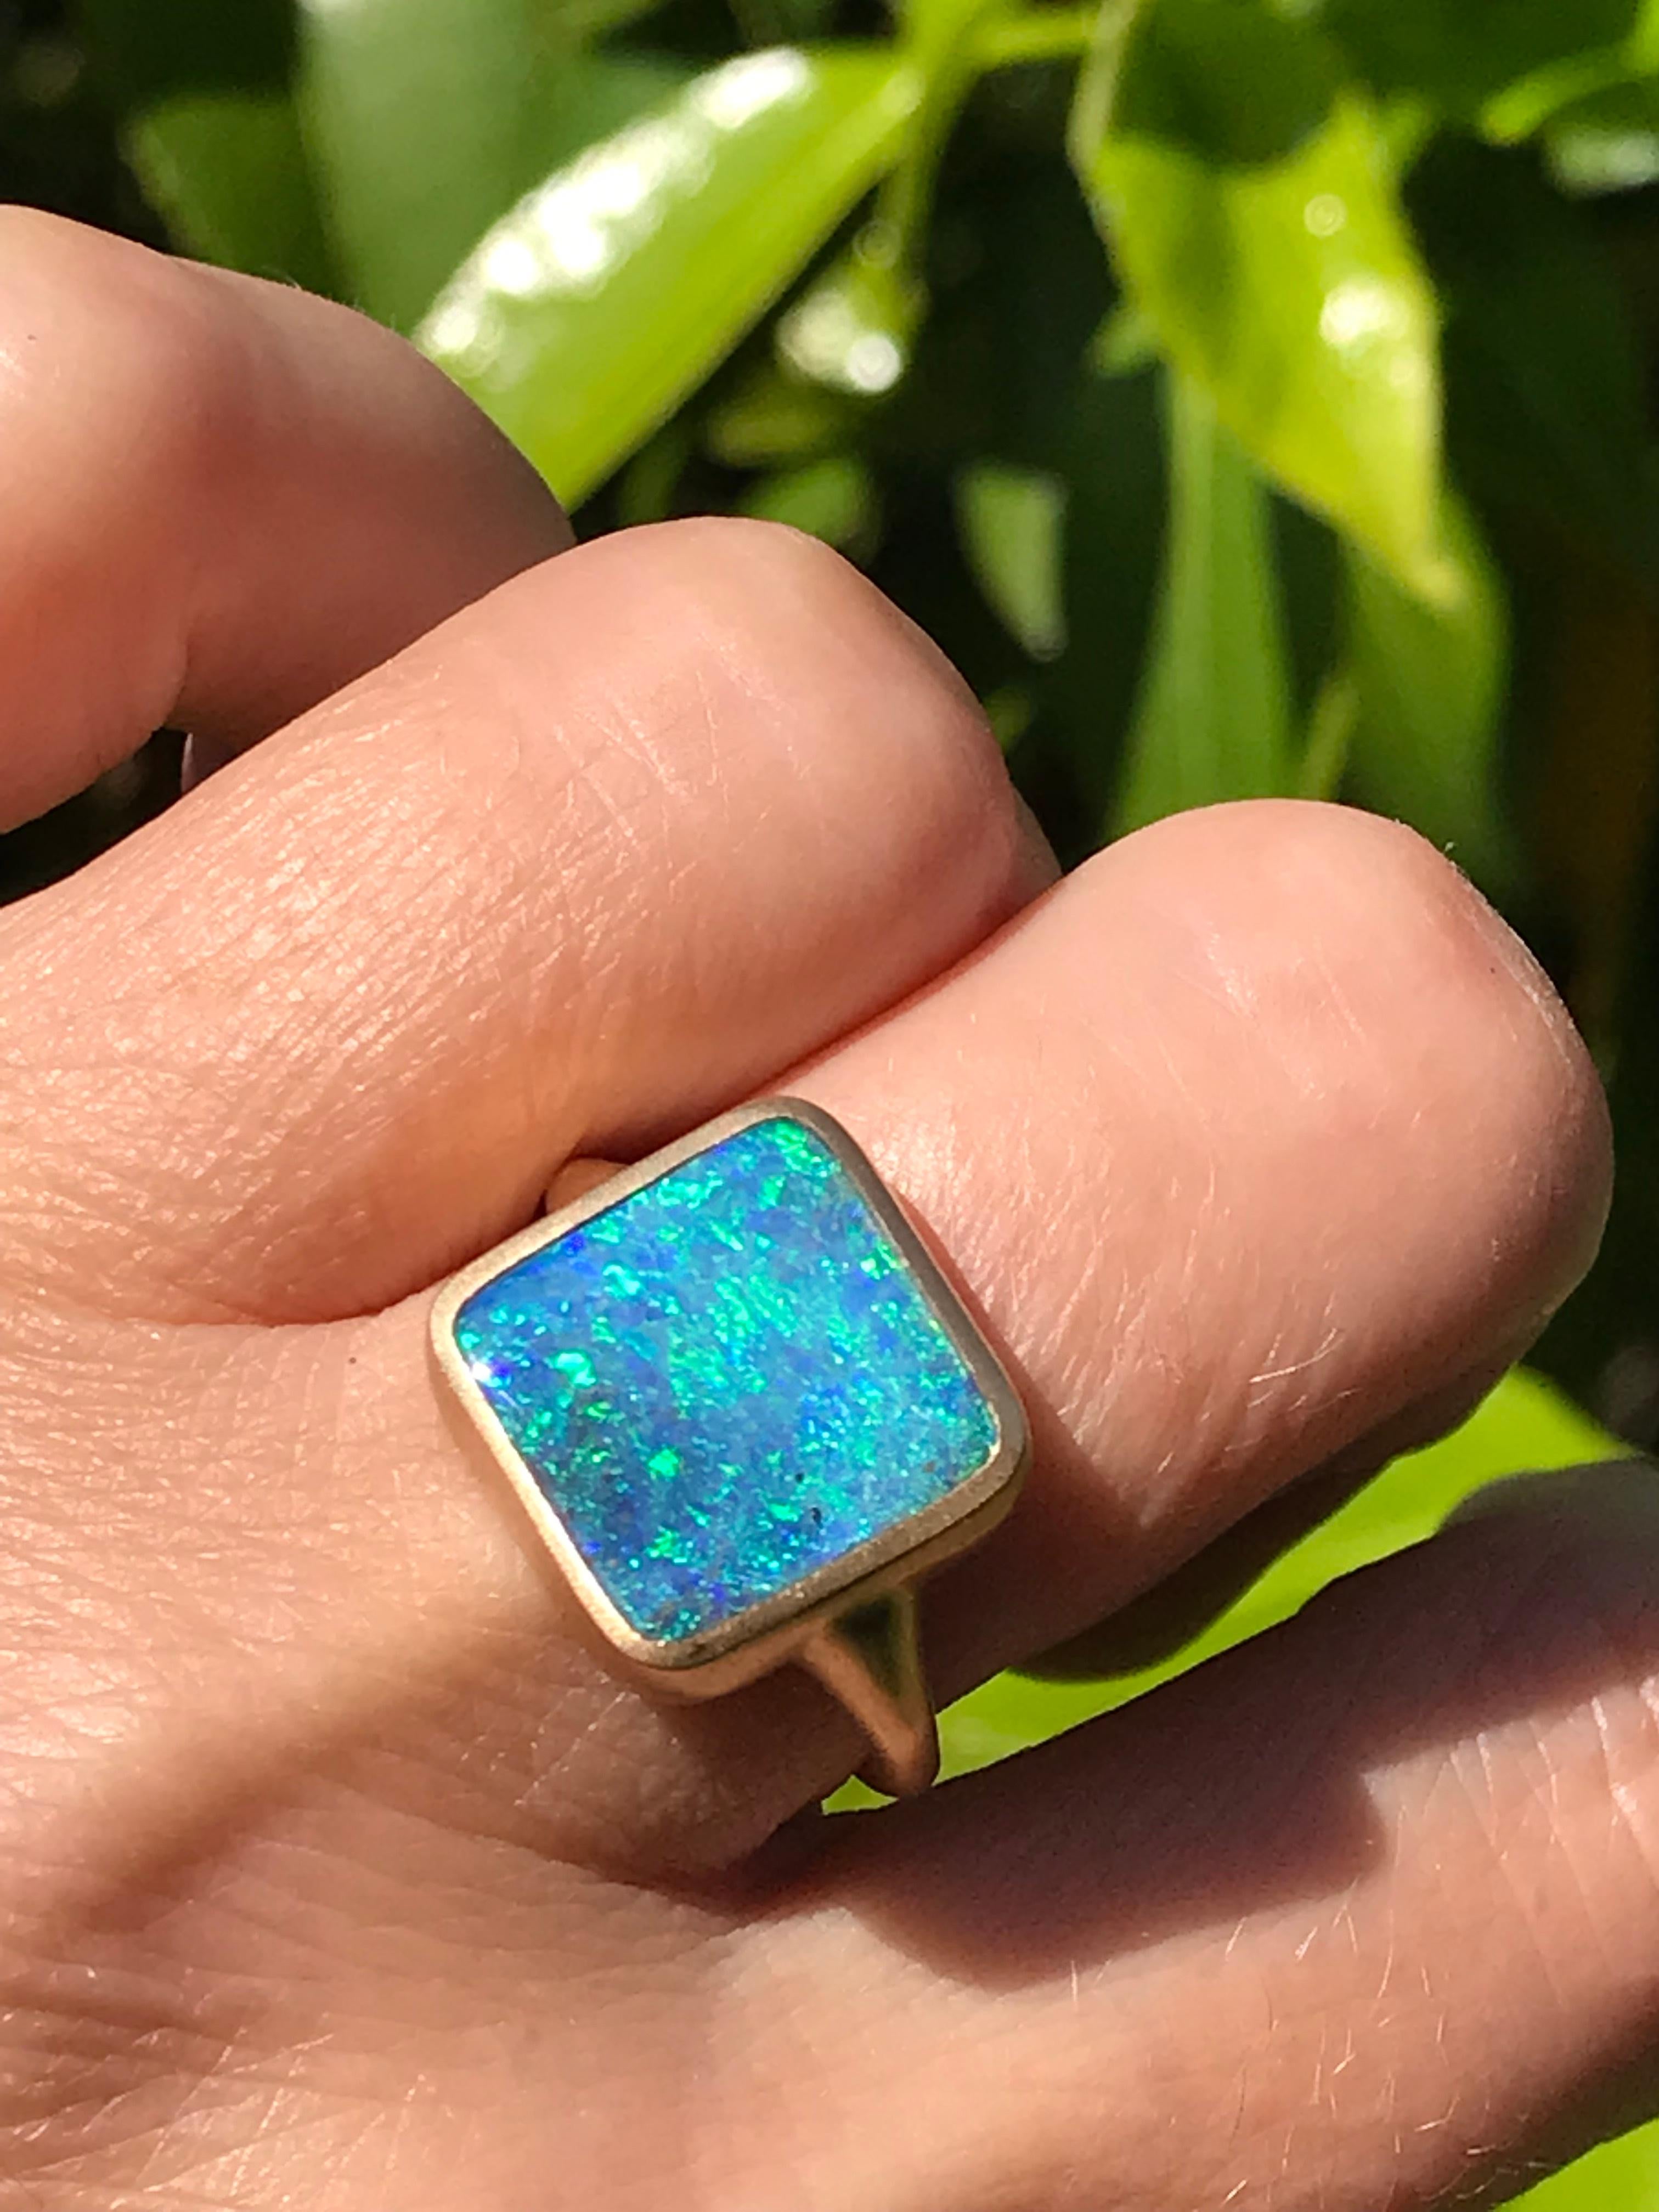 Dalben design One of a kind 18 kt yellow  gold satin finishing ring with  blue green colors solid Australian Boulder Opal square shape weight 6,89 carats  .
Ring size  US 6 3/4 +  -  EU 54 re-sizable .  
Bezels setting dimension:  
width 13,7 mm, 